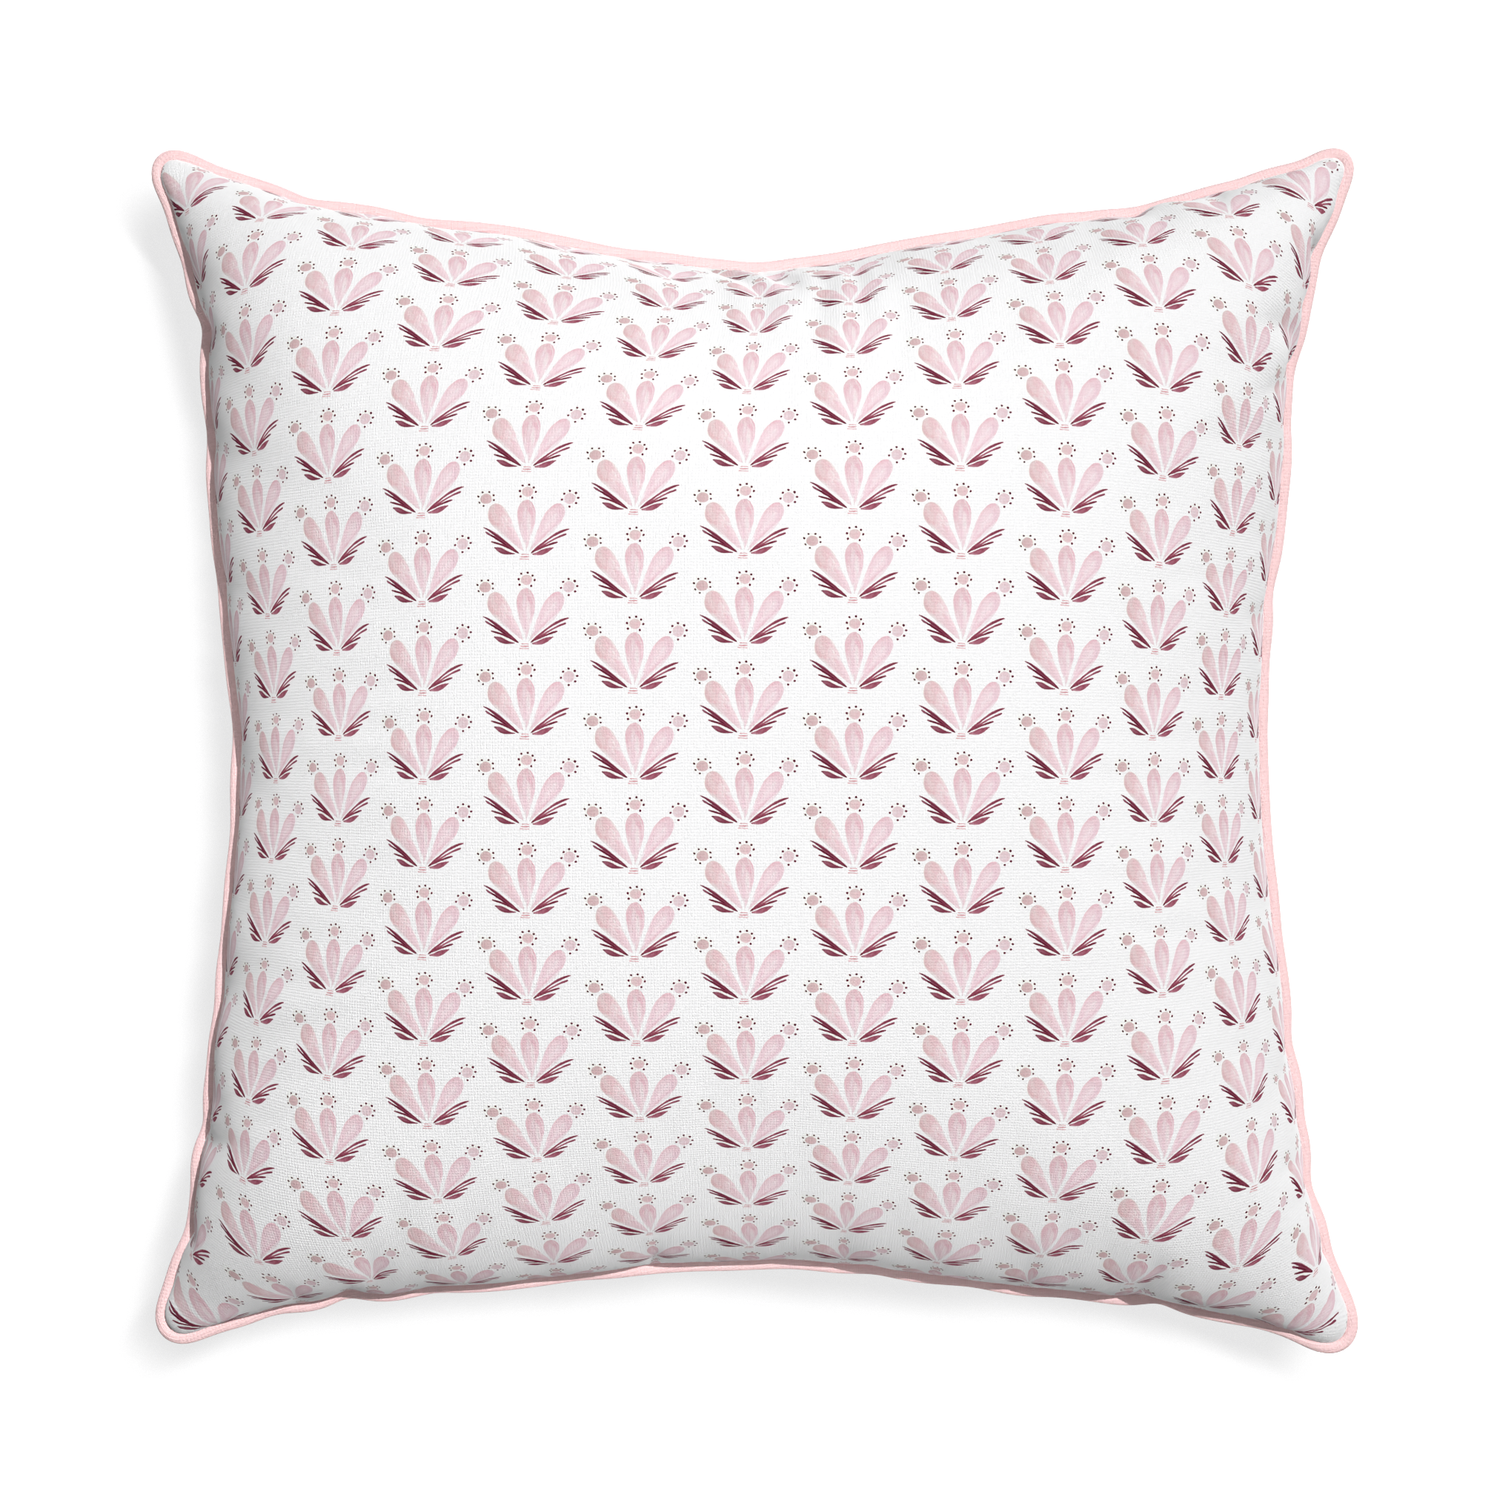 Euro-sham serena pink custom pillow with petal piping on white background